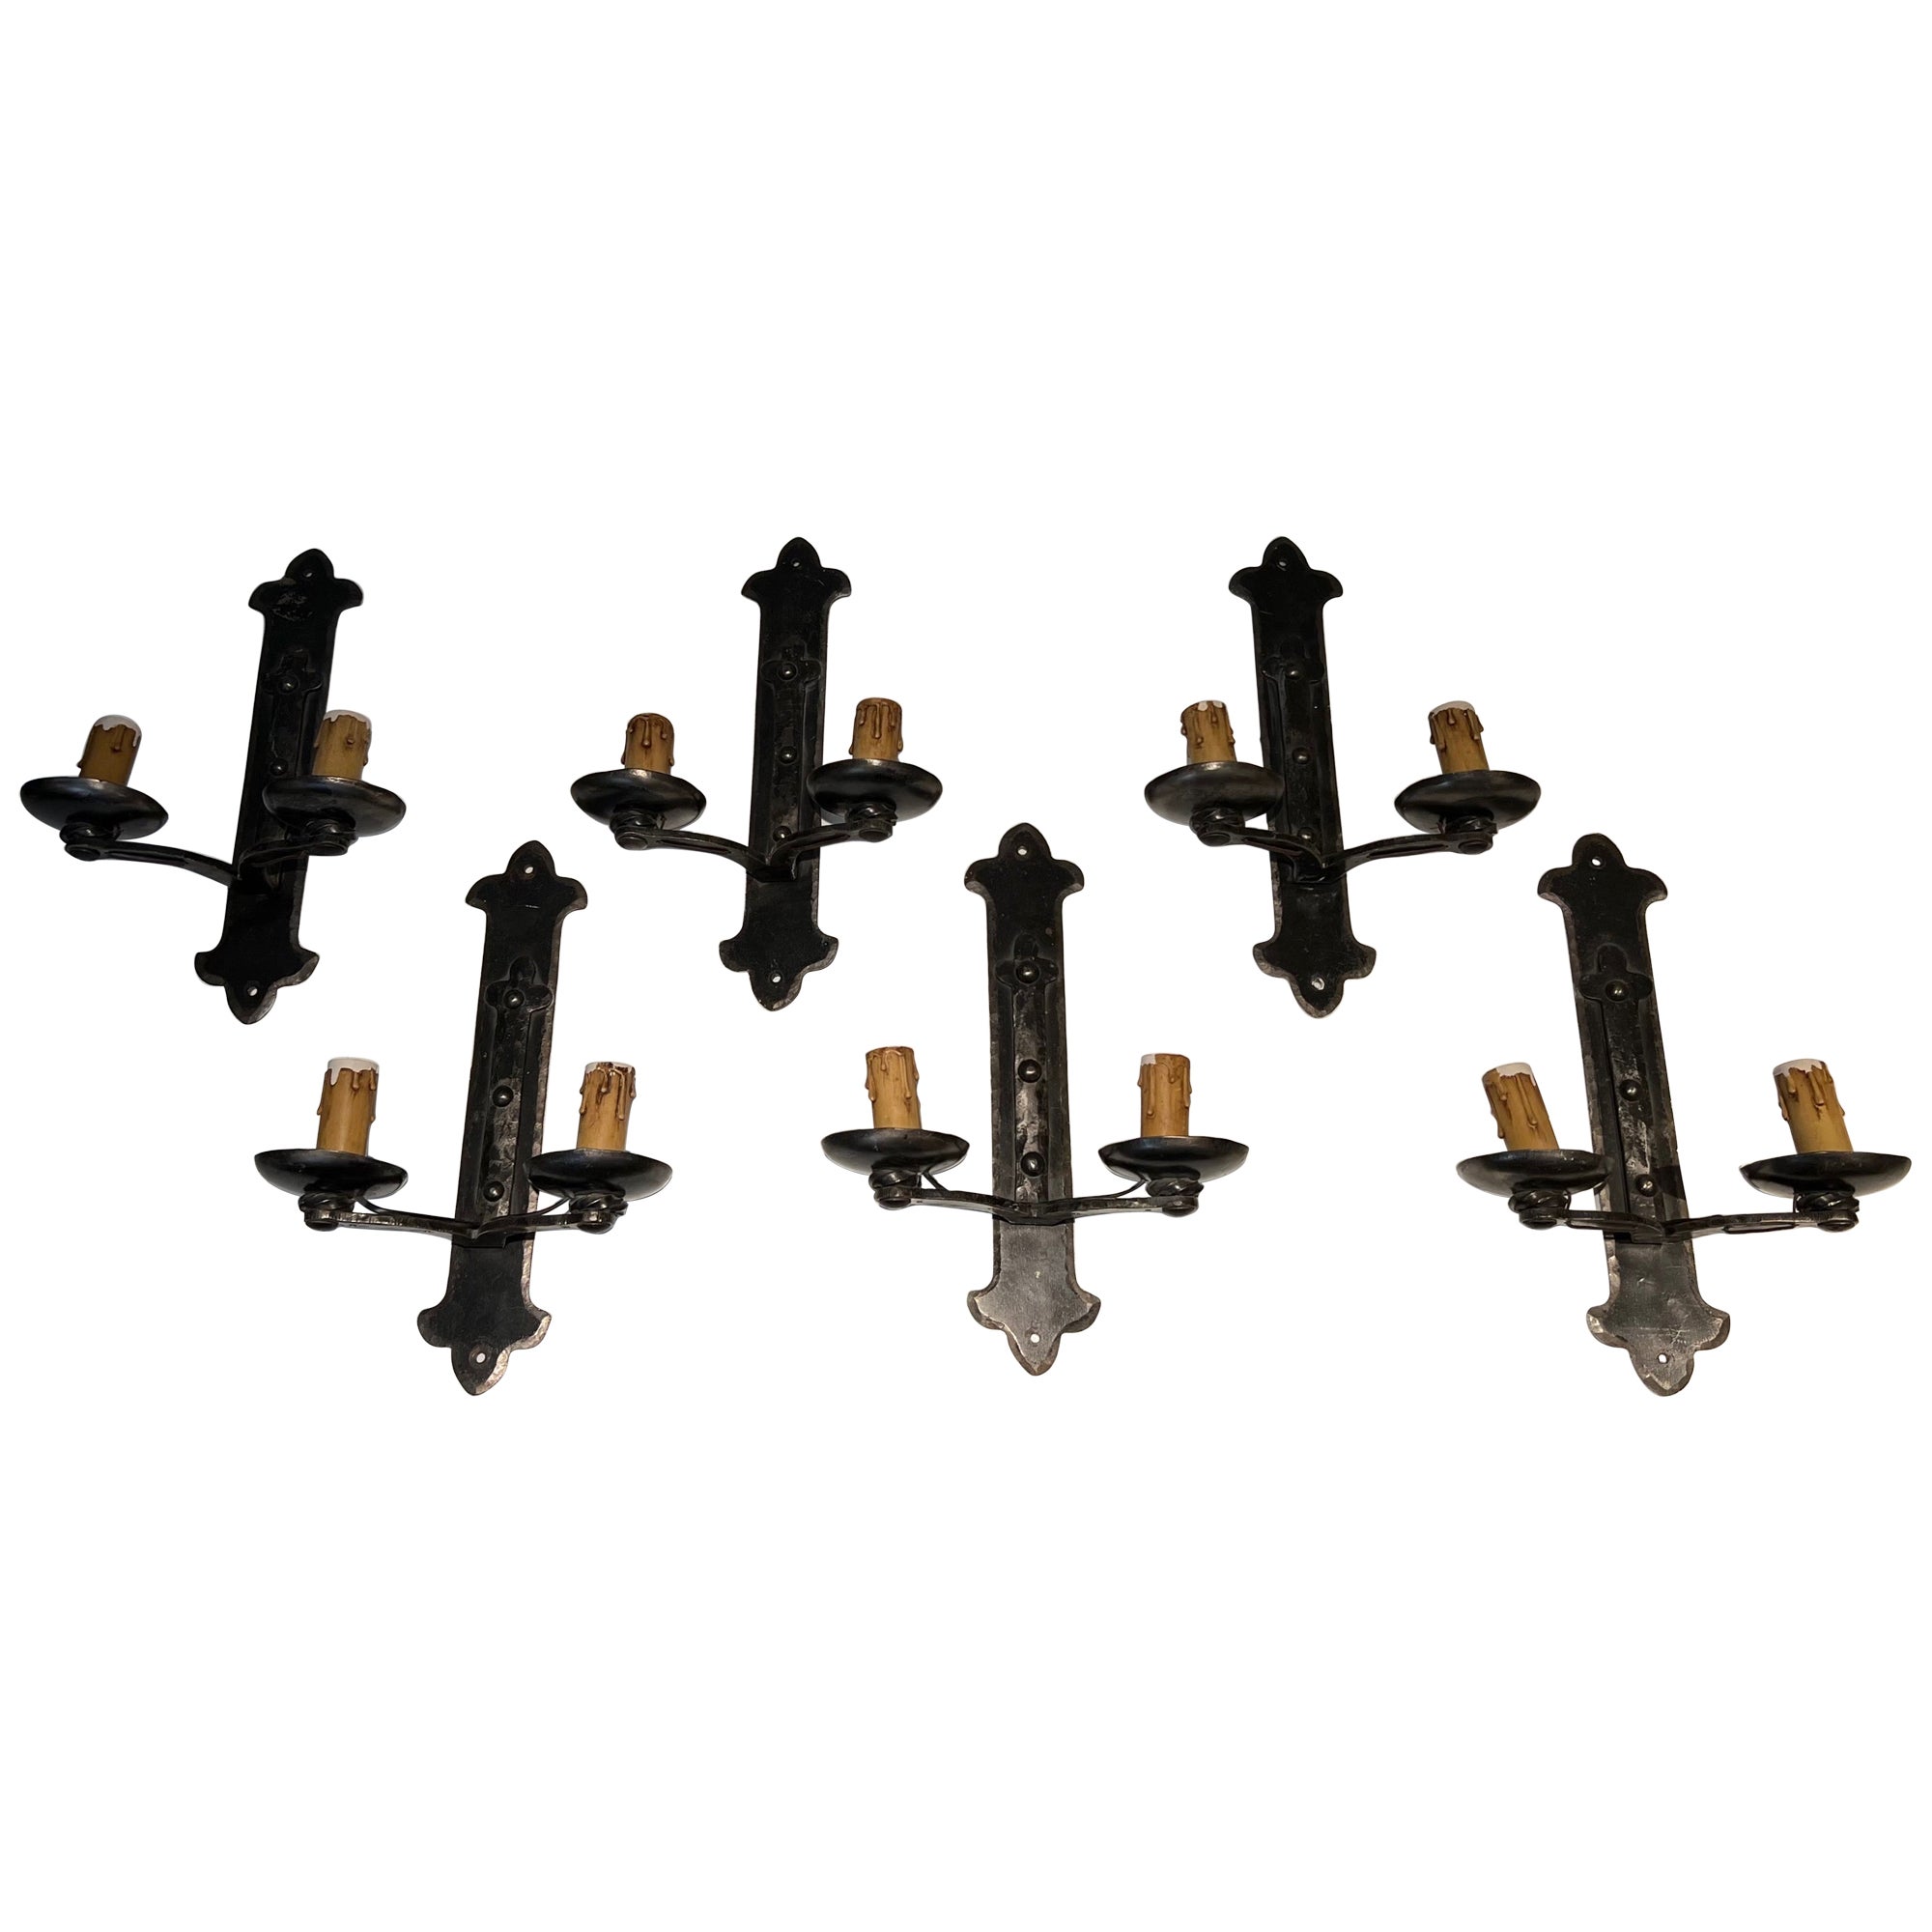 Set of Six Wrought Iron Wall Lights in the Gothic Style. Circa 1950